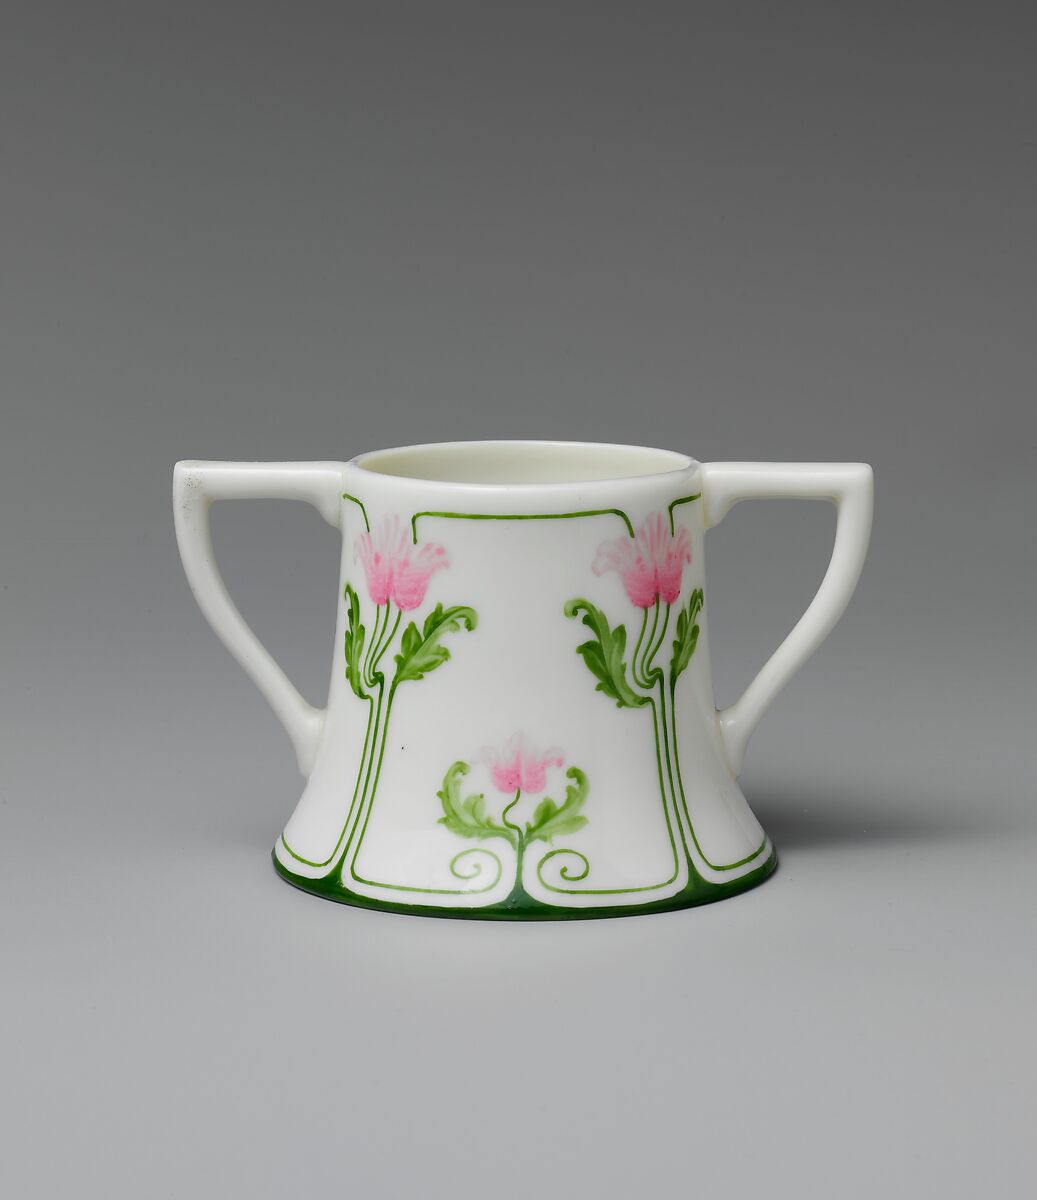 Sugar Bowl, Manufactured by Lenox, Incorporated (American, Trenton, New Jersey, established 1889), White bone porcelain, American 